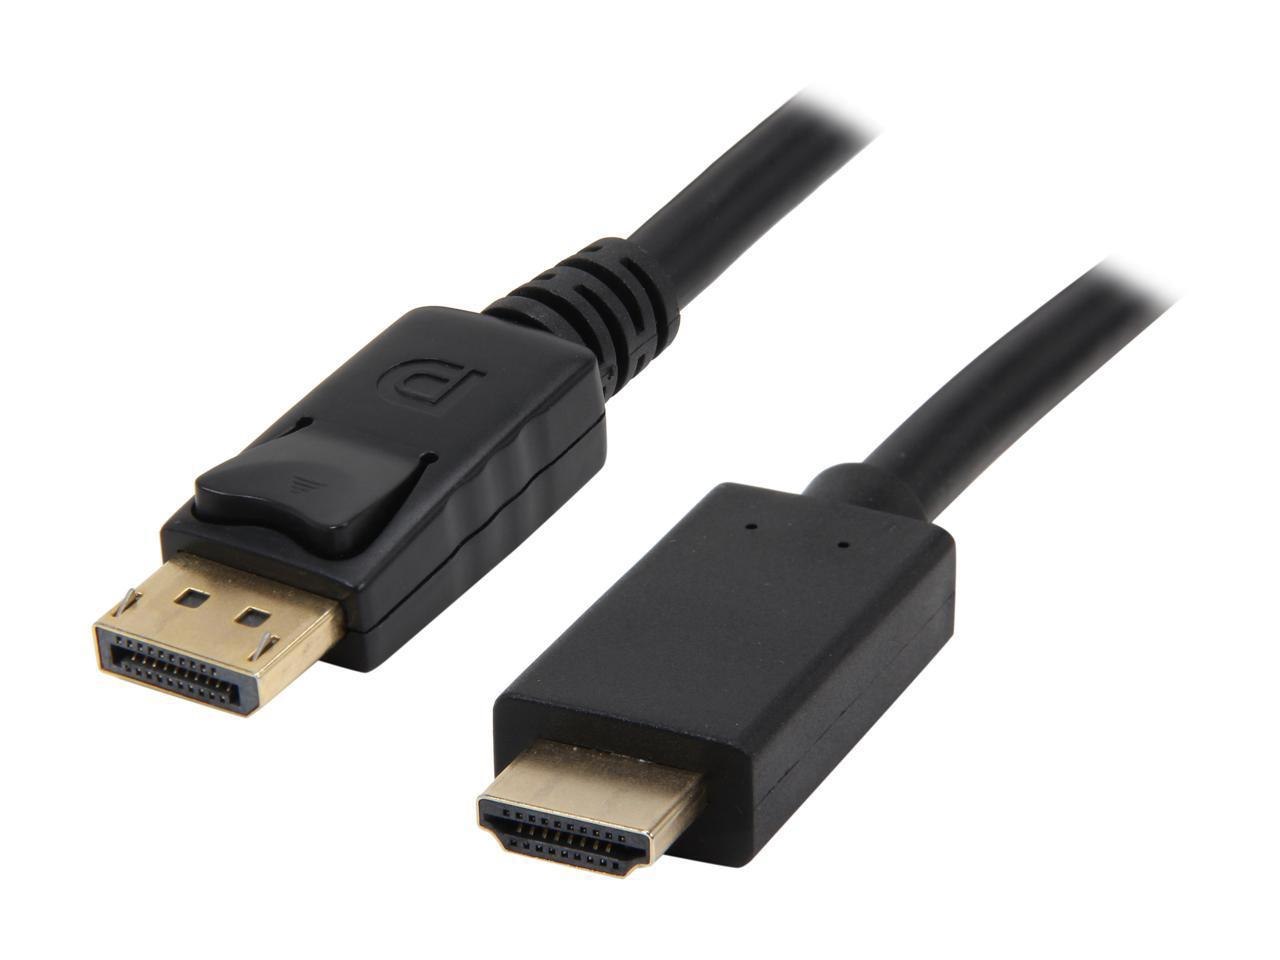 Nippon Labs Dp-Hdmi-10 10 FT. DisplayPort To Hdmi Converter Cable Supporting VR / 3D / 4K